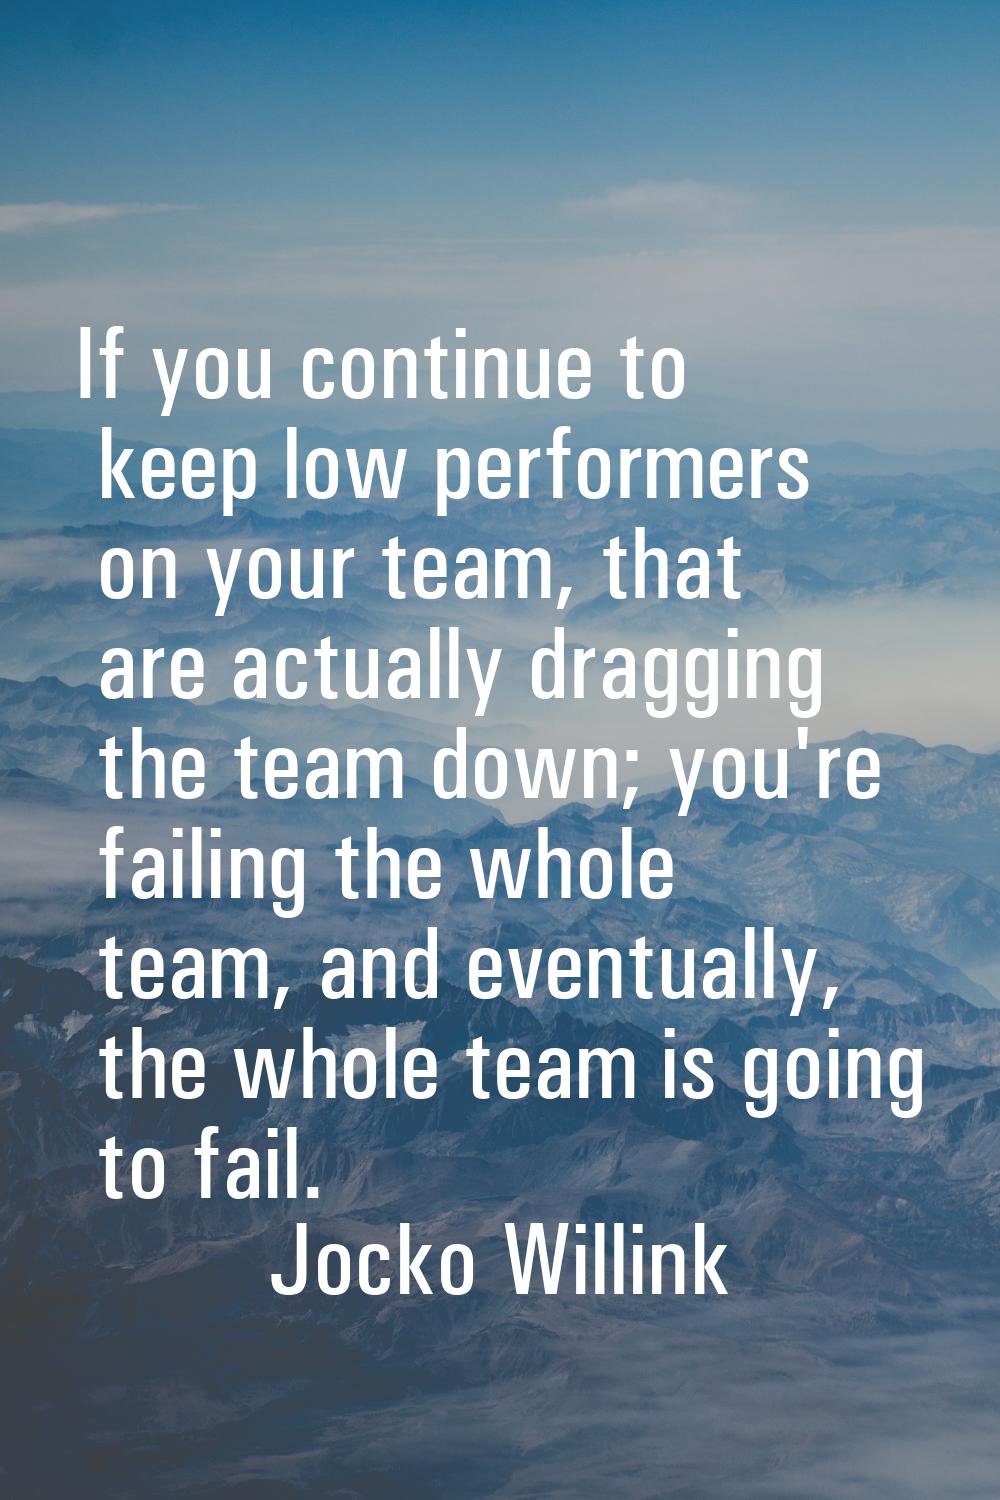 If you continue to keep low performers on your team, that are actually dragging the team down; you'